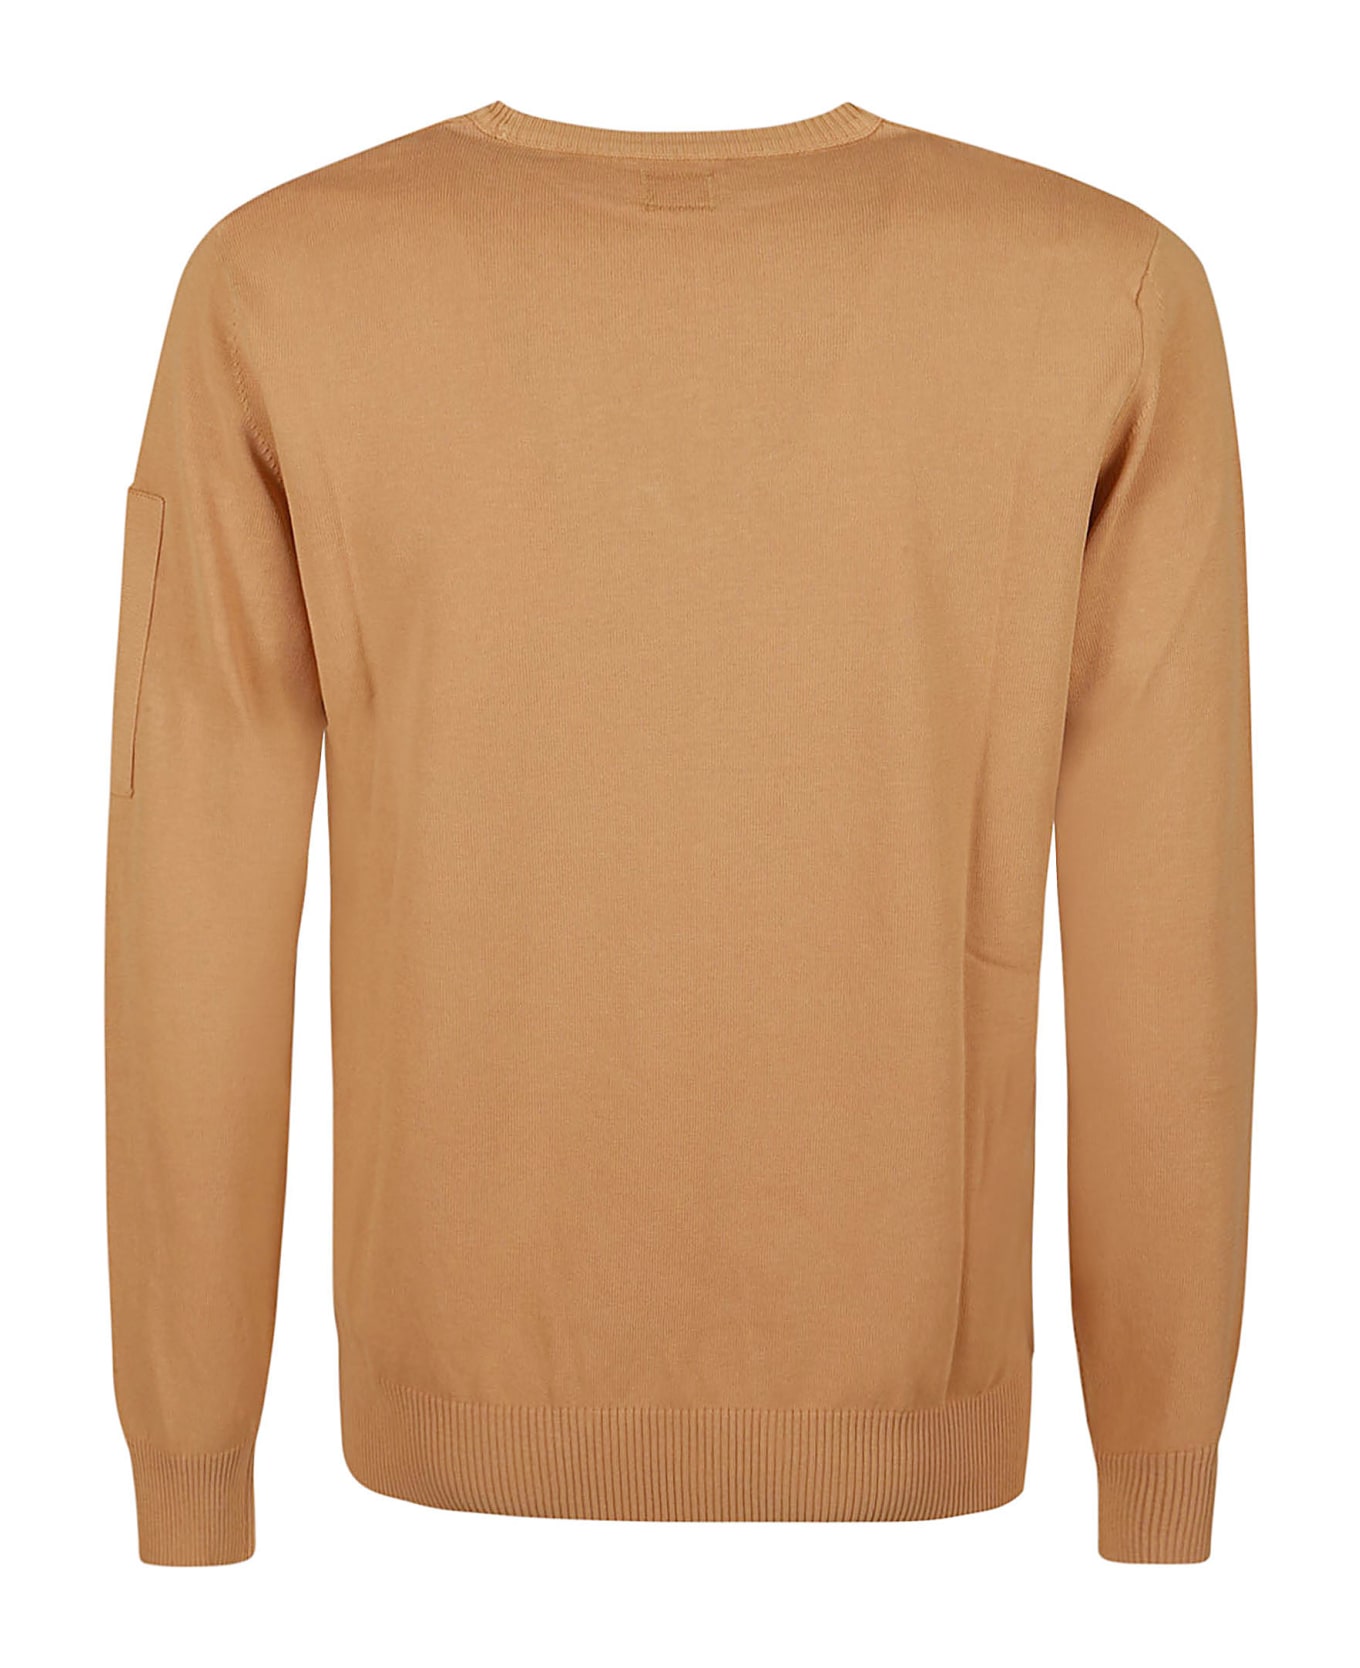 C.P. Company Old Dyed Crepe Sweatshirt - PASTRY SHELL フリース